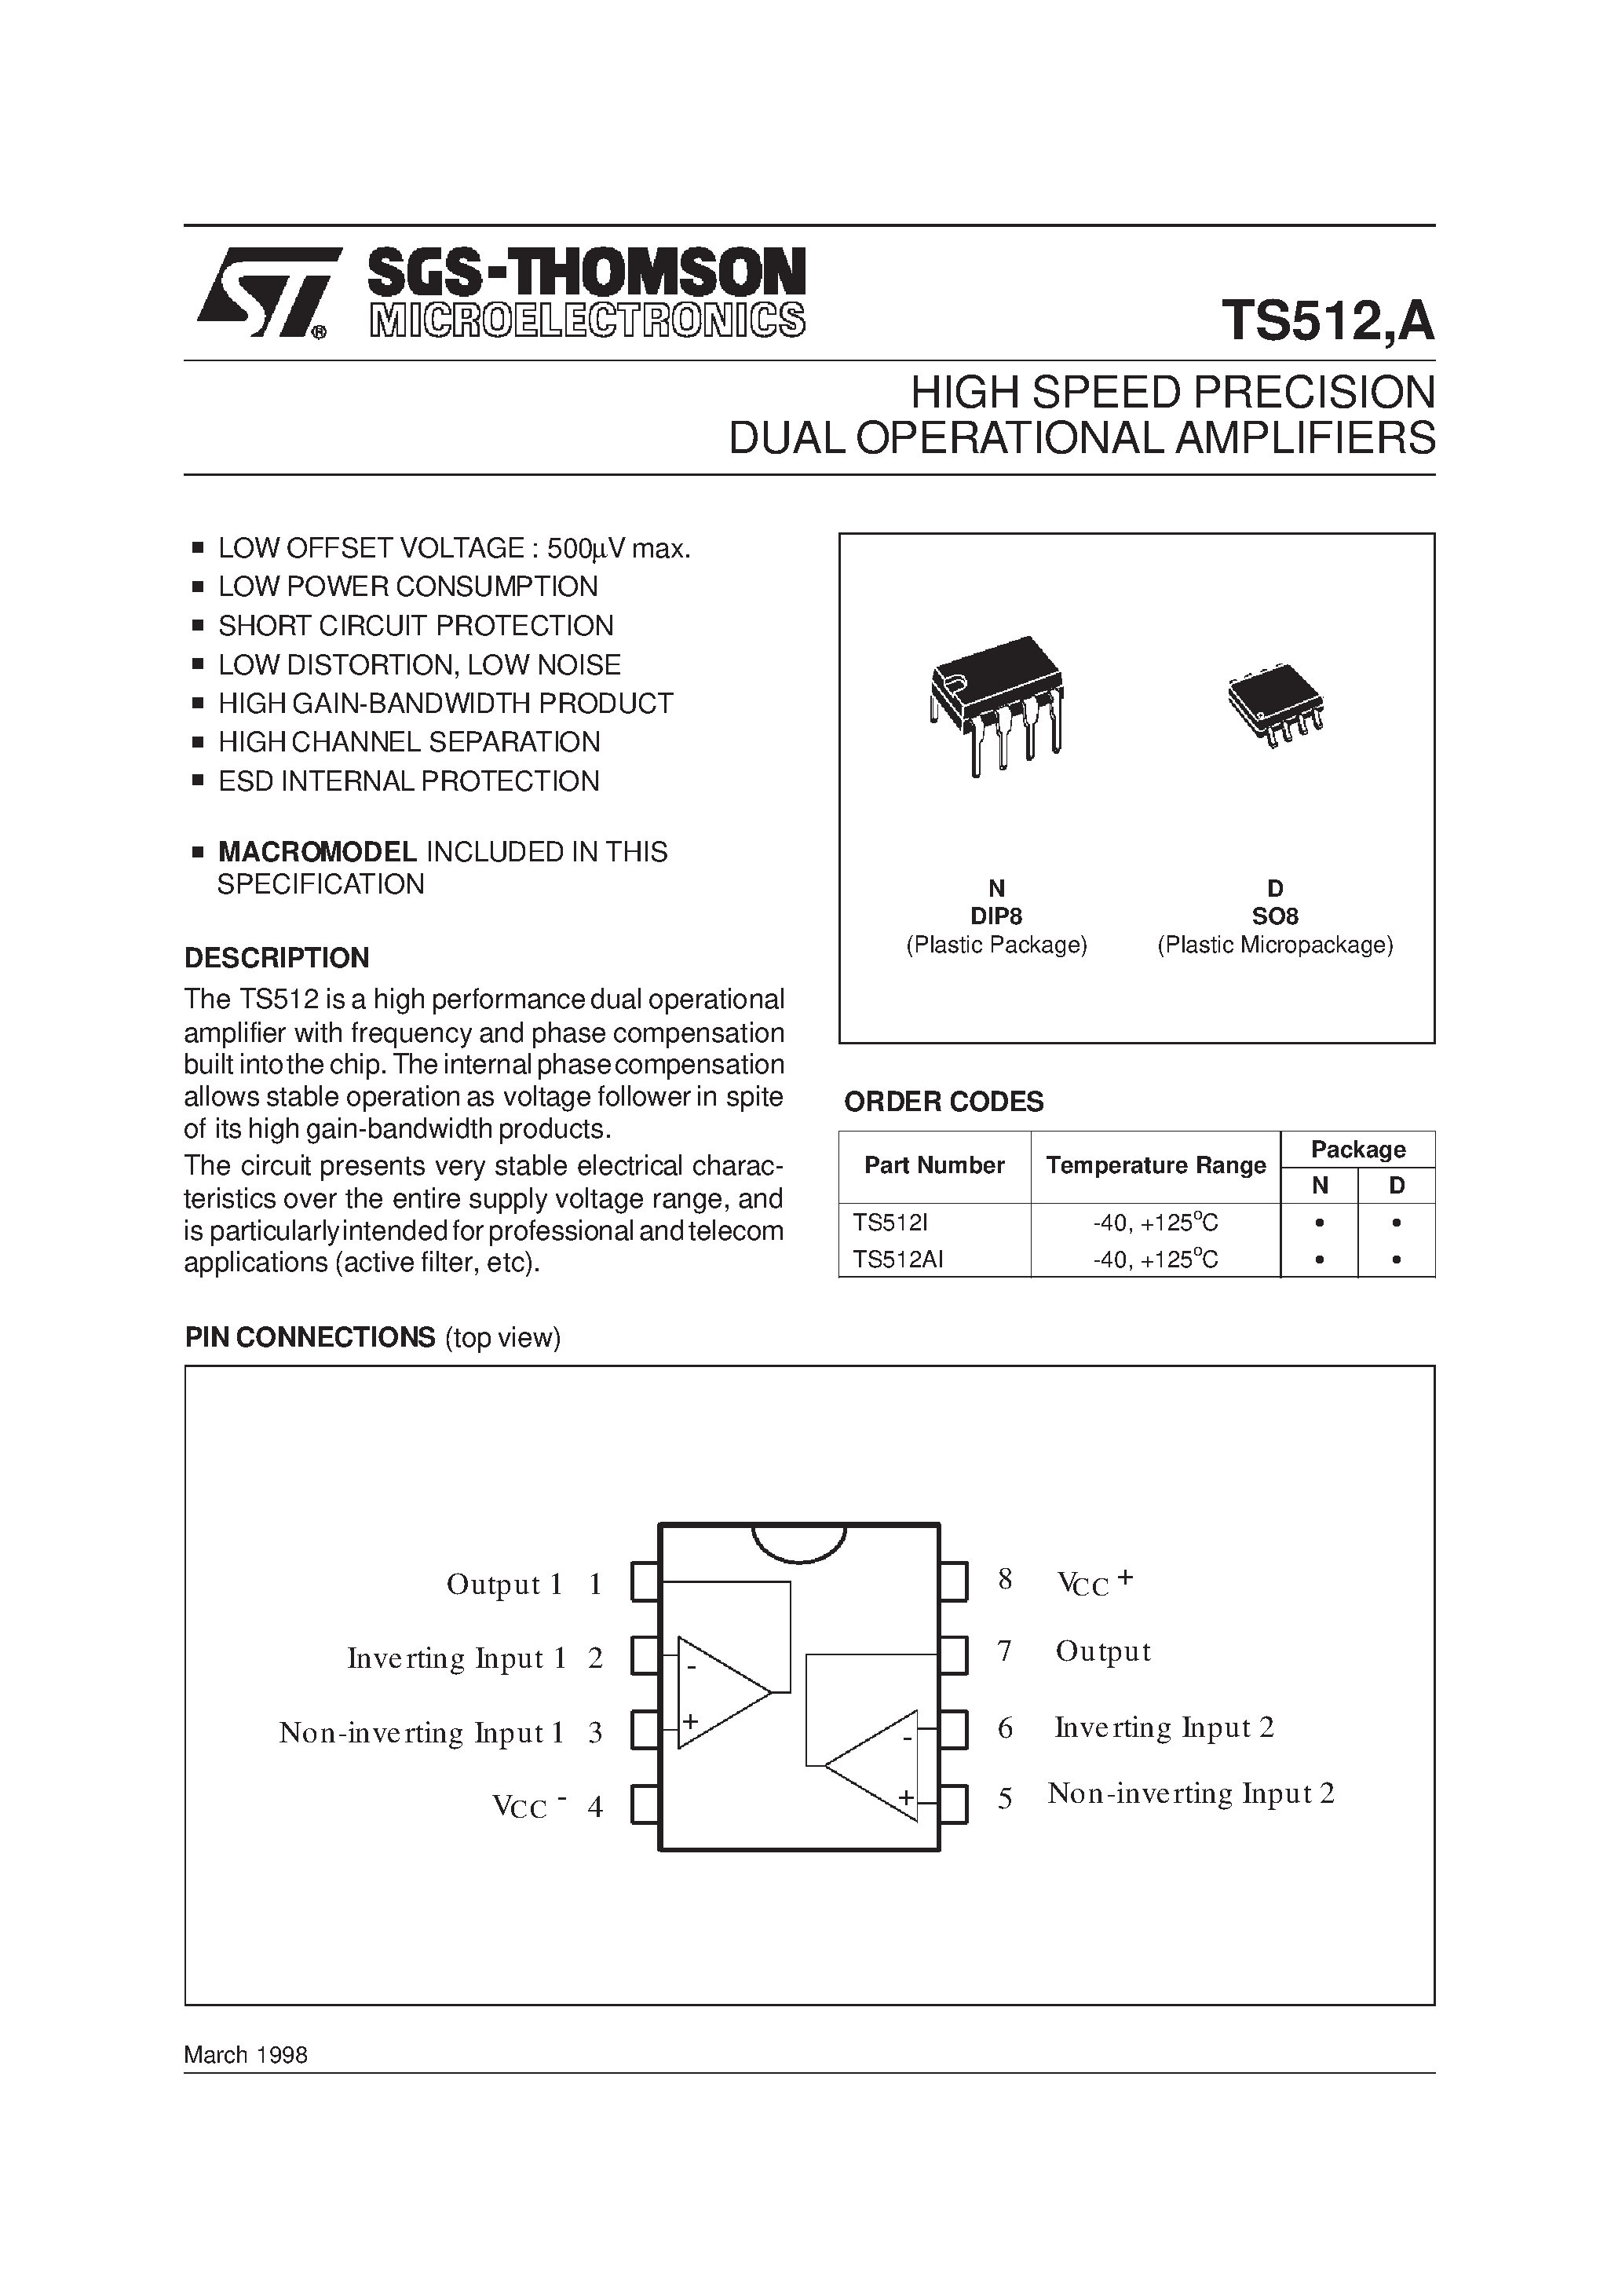 Datasheet TS512AI - HIGH SPEED PRECISION DUAL OPERATIONAL AMPLIFIERS page 1